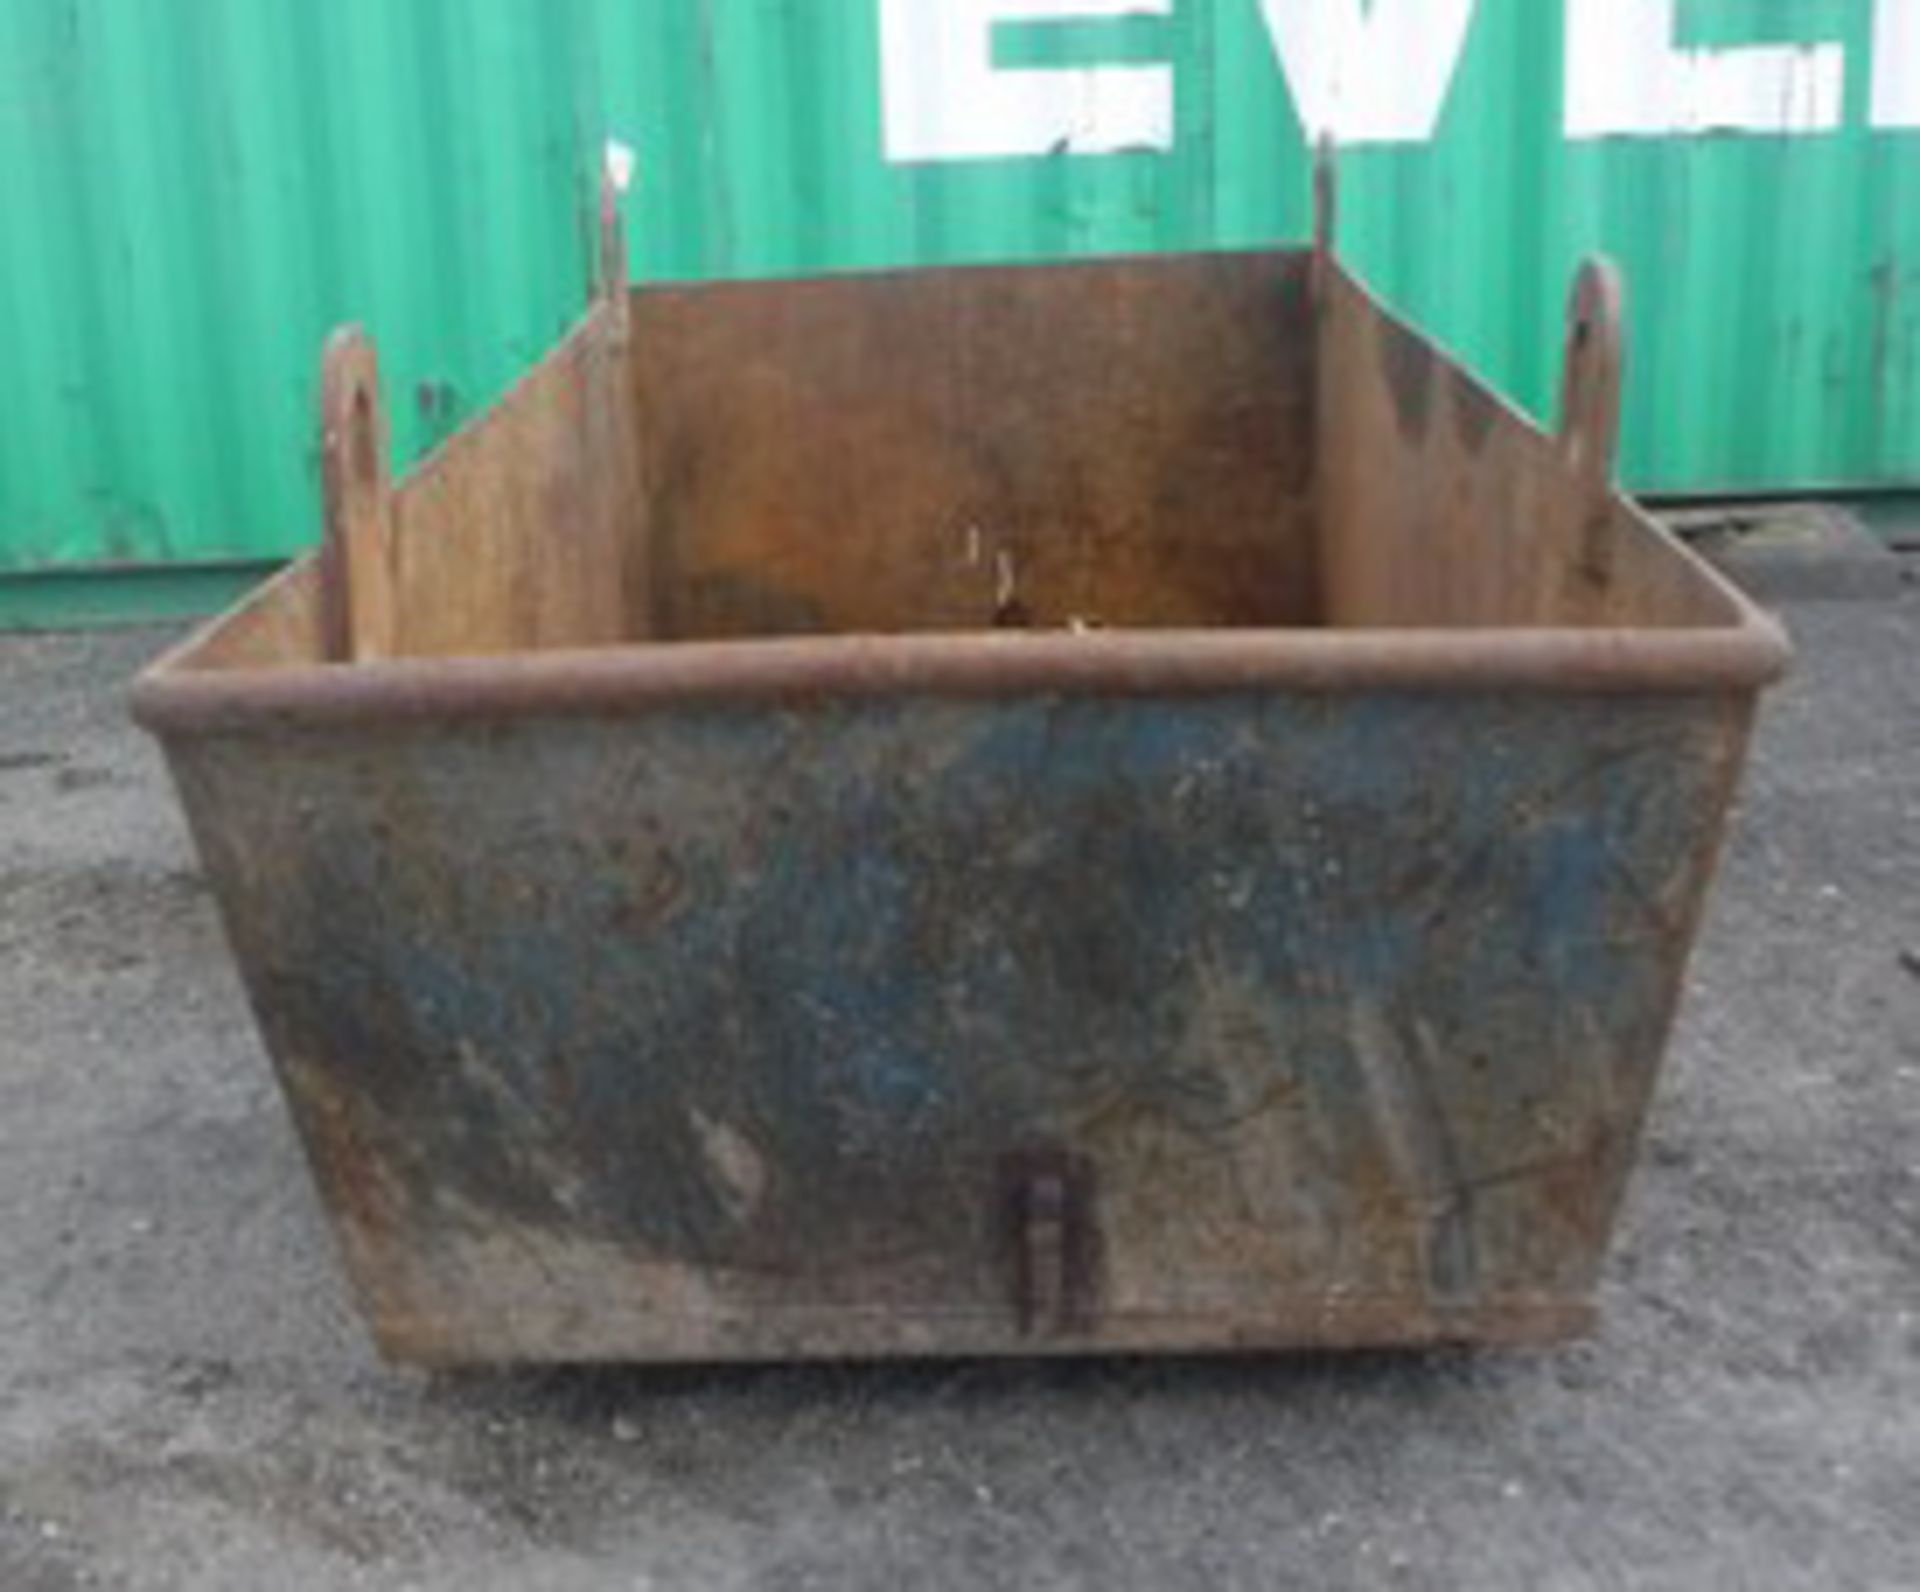 TIPPING skip